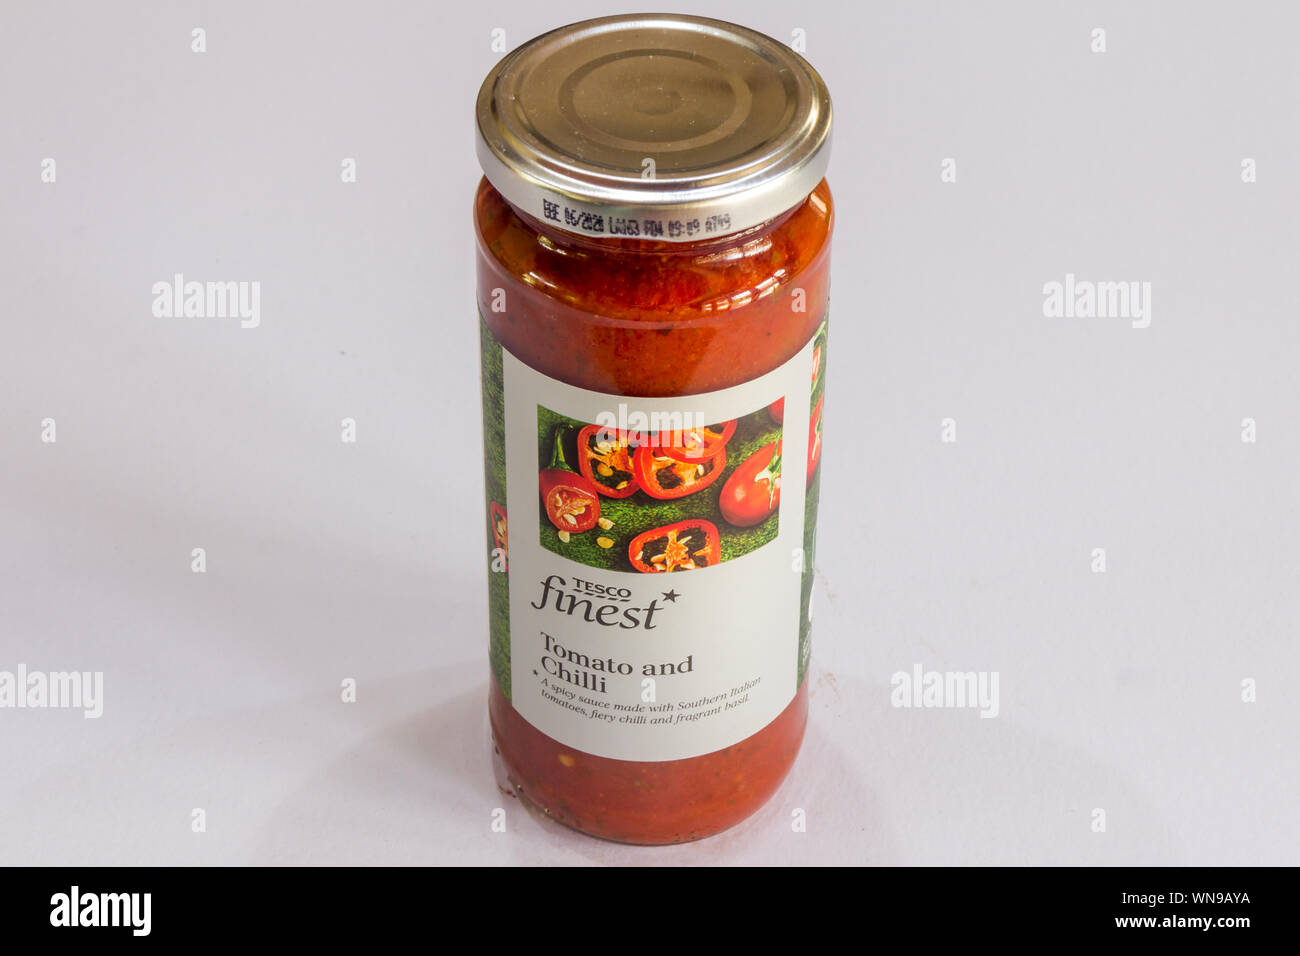 Phuket, Thailand - August 1st 2019: Tesco finest tomato and chilli sauce in a glass jar. Tesco is a major British supermarket chain. Stock Photo